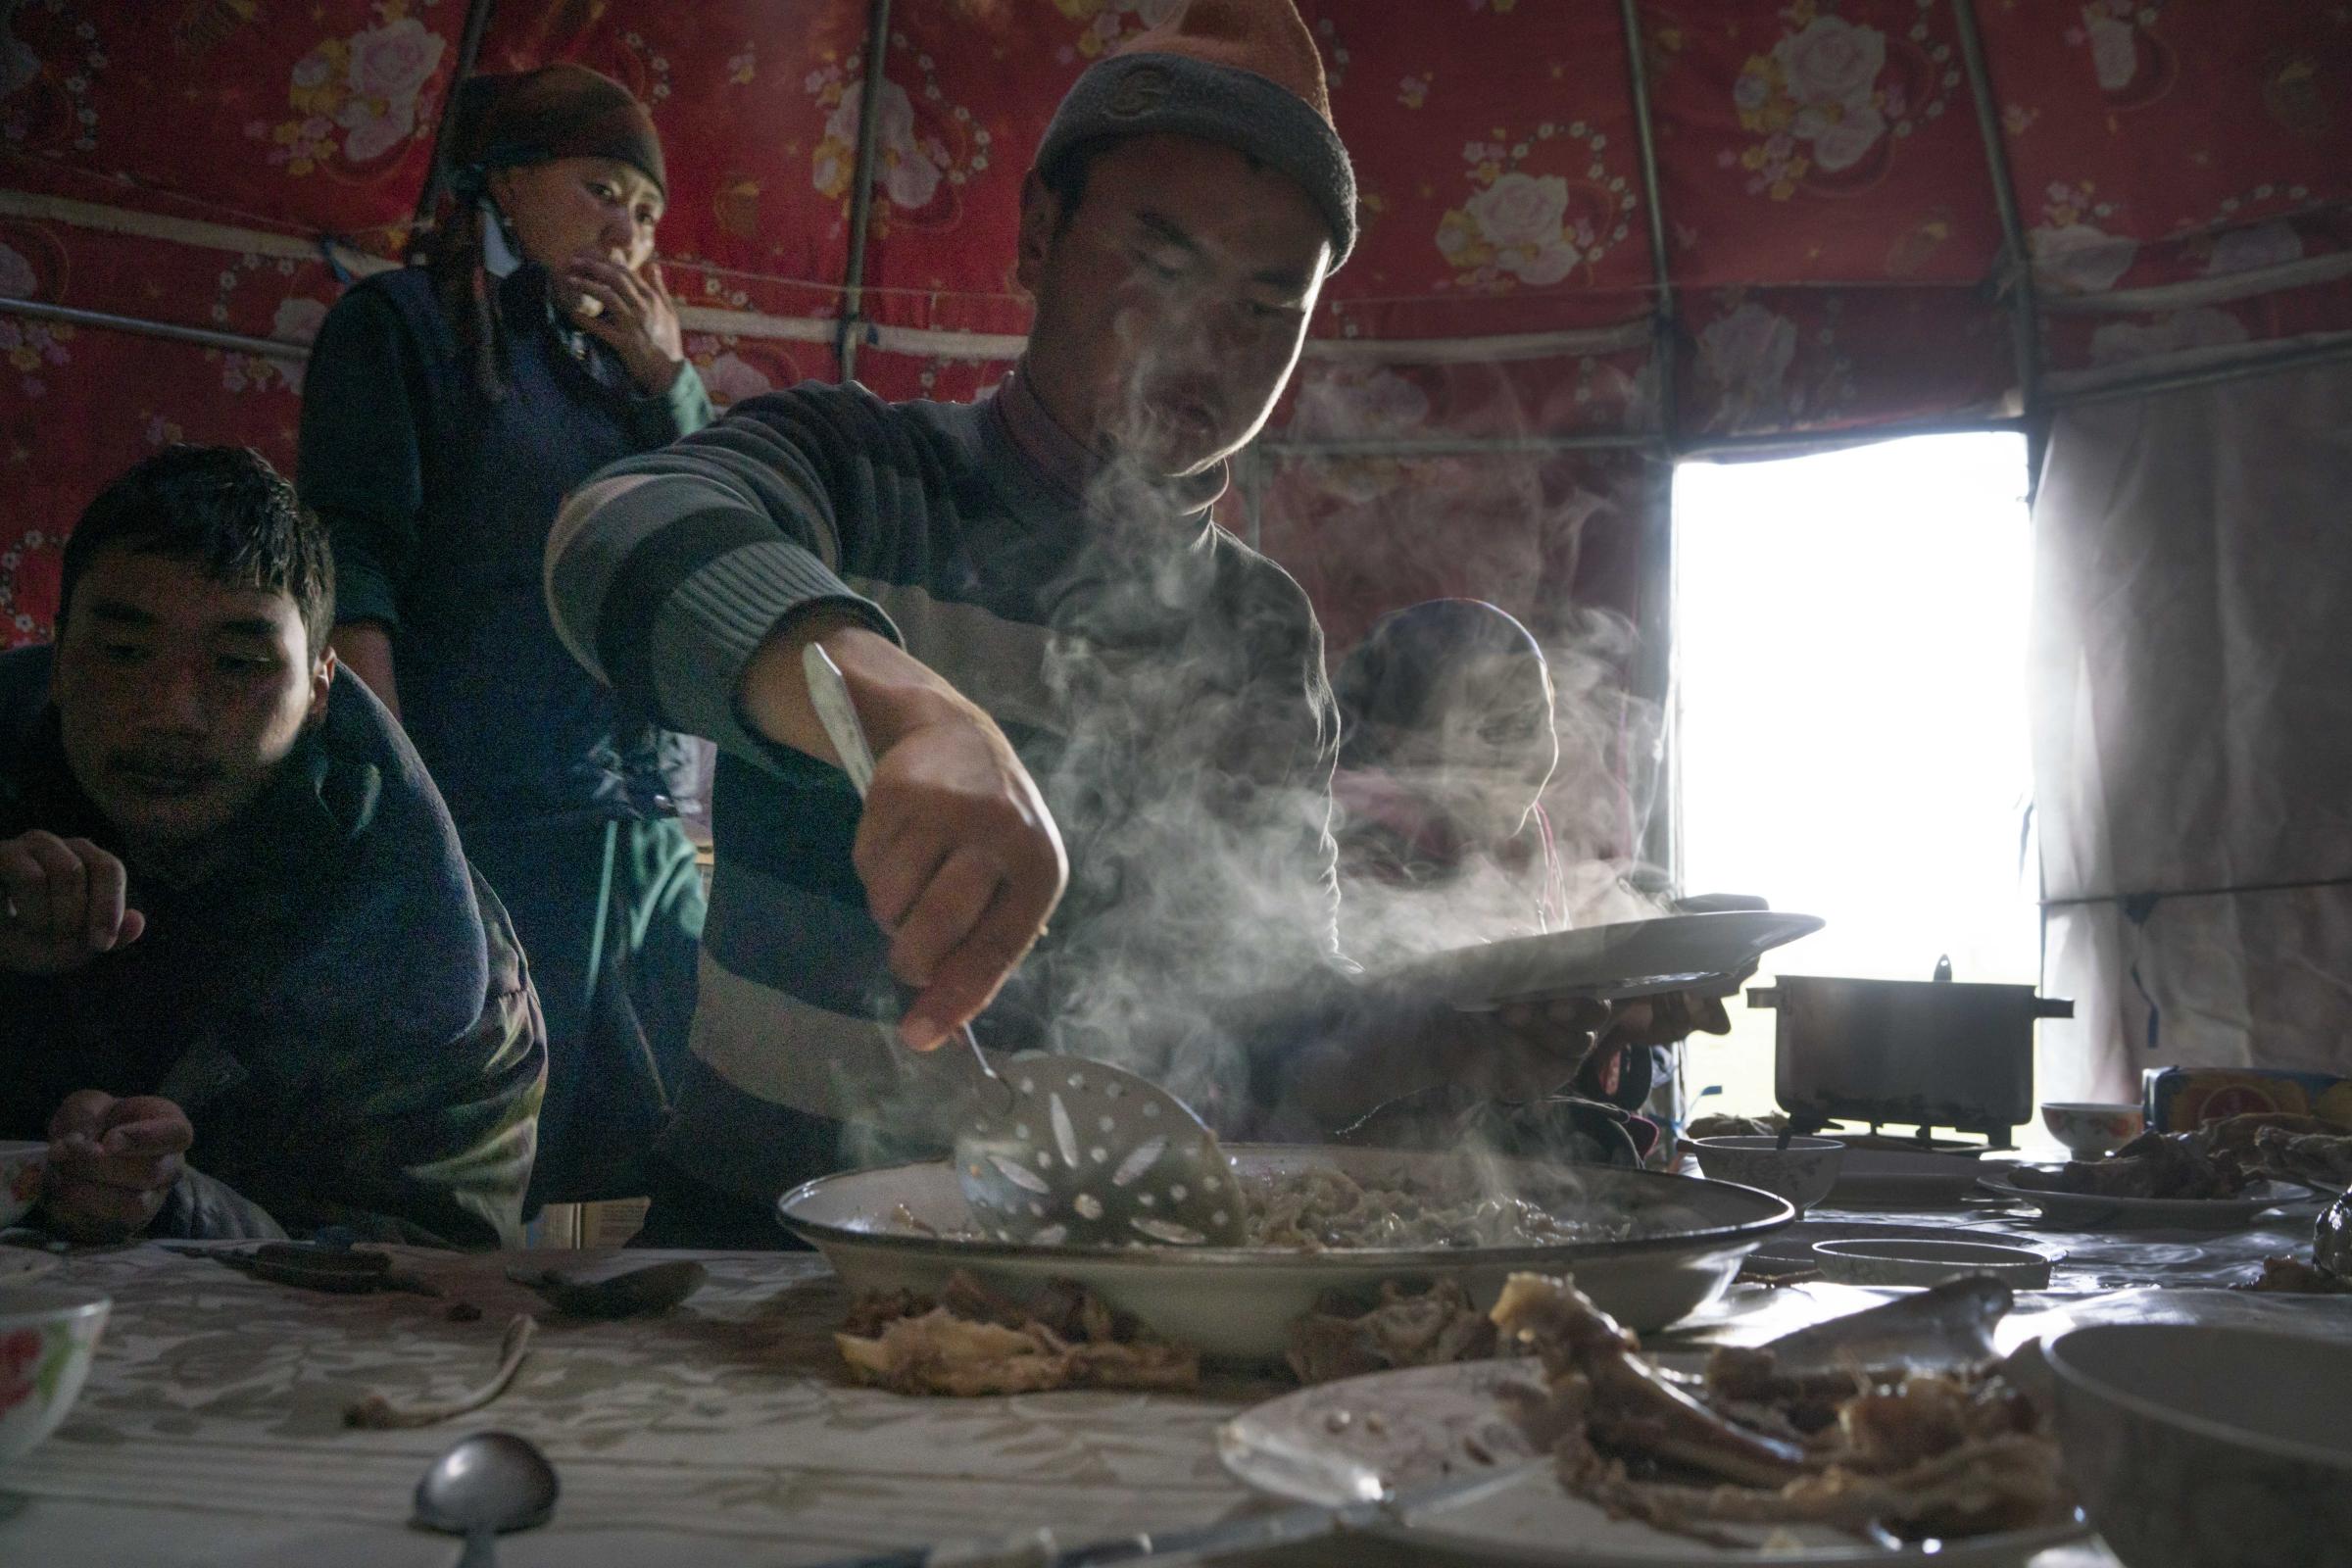 Nomads - A meal of freshly slaughtered mutton is served to guests from a neighboring yurt camp. Seating...